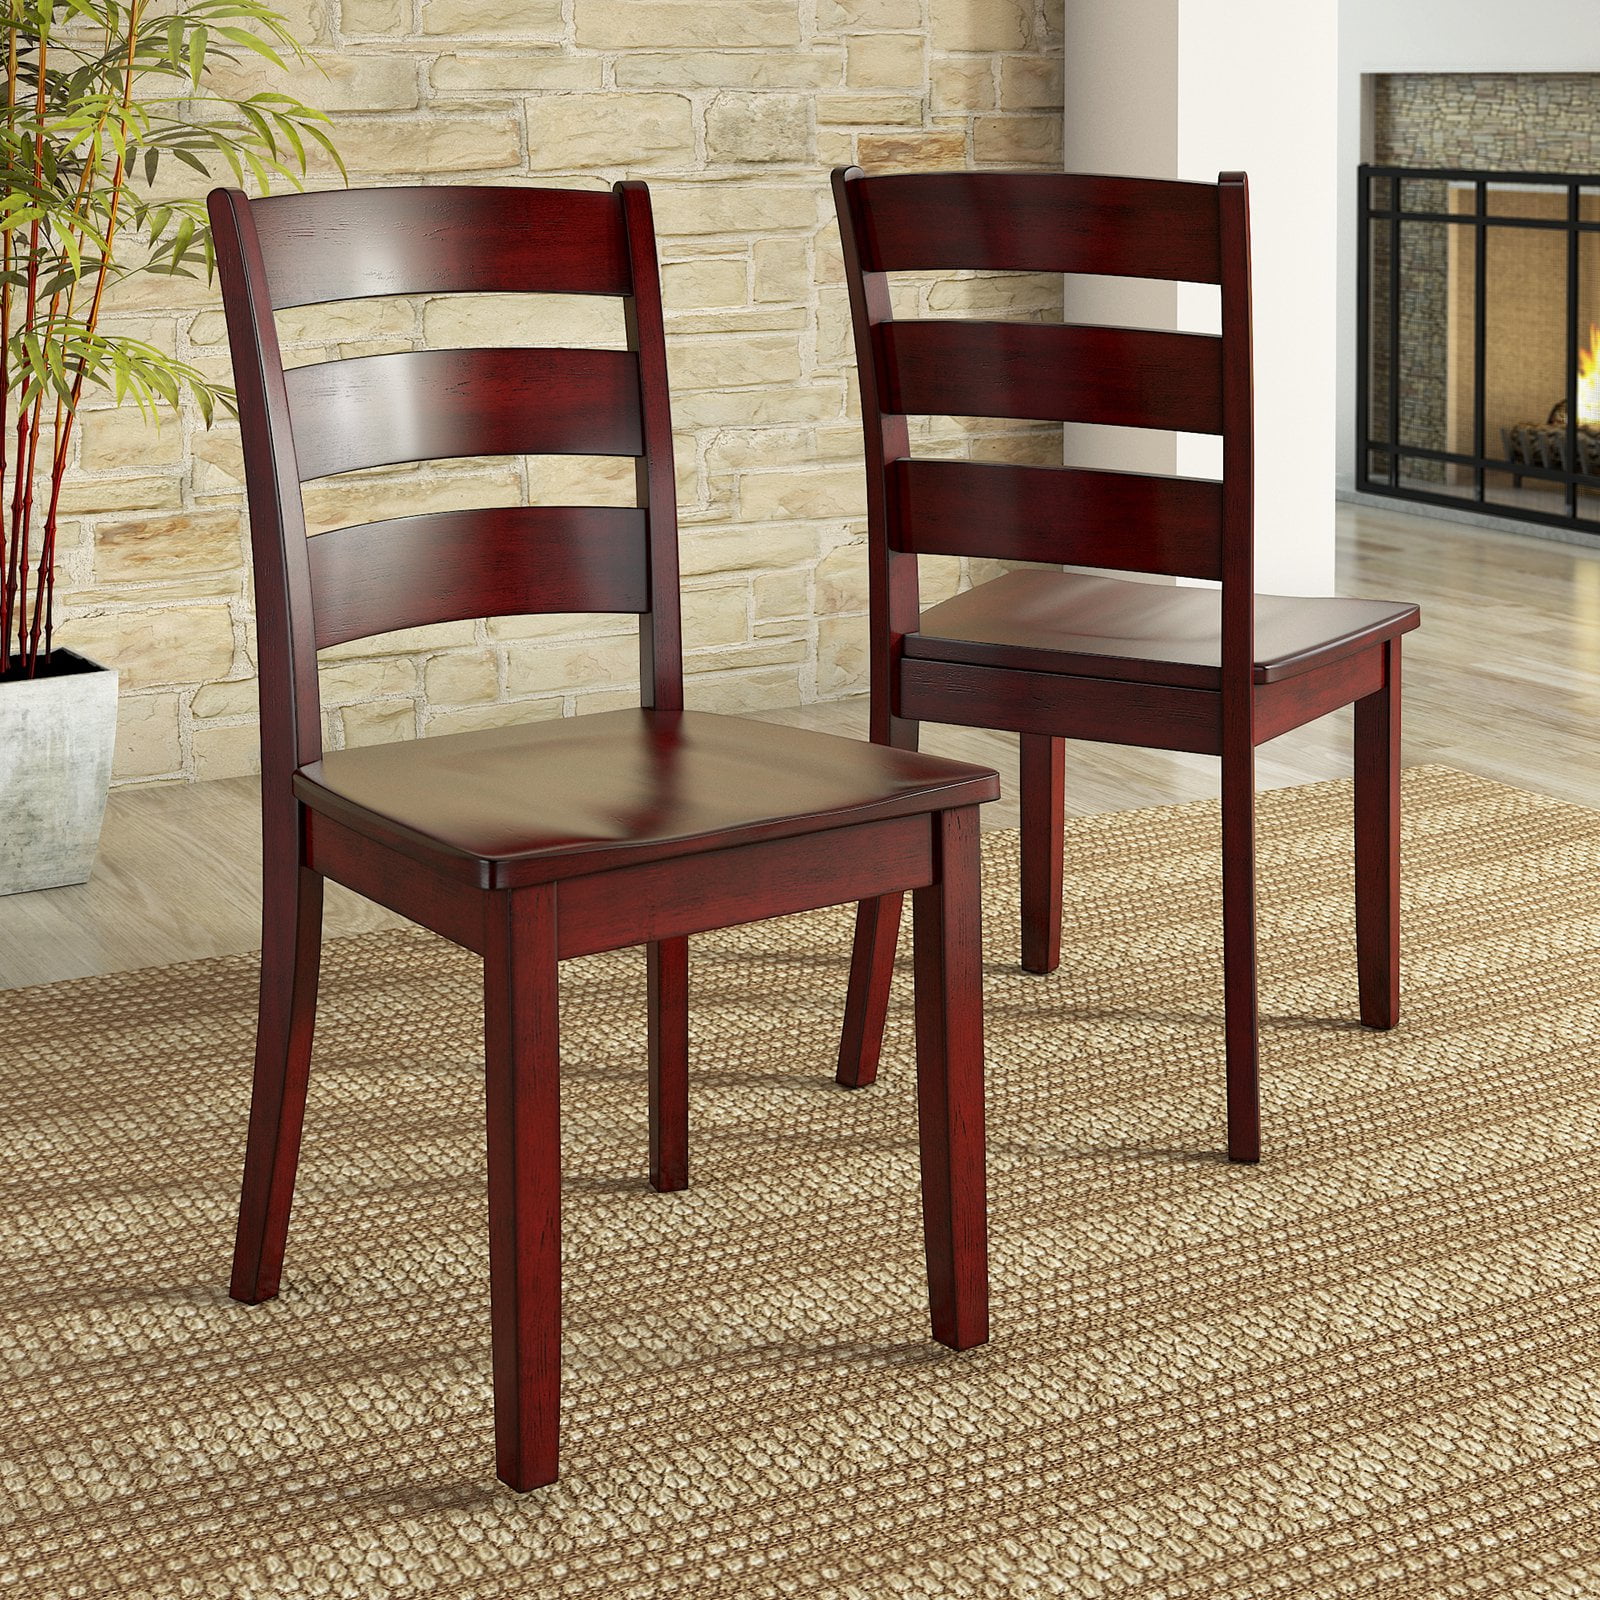 Lexington Wood Ladder Back Dining Chairs, Set of 2, Berry Red - Walmart